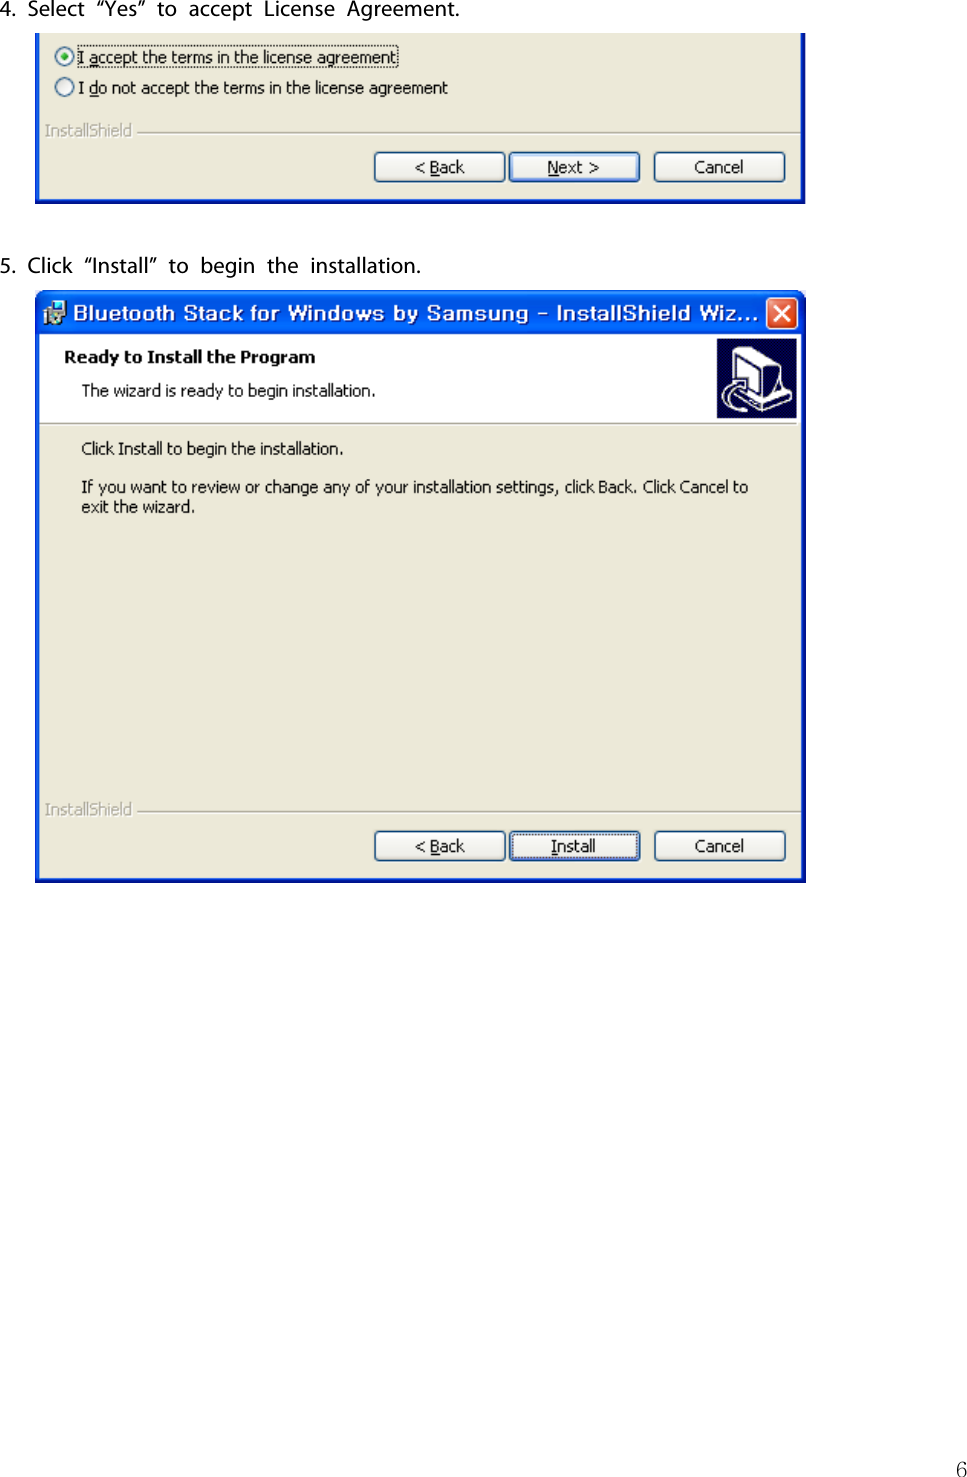 64. Select “Yes” to accept License Agreement.5. Click “Install” to begin the installation.